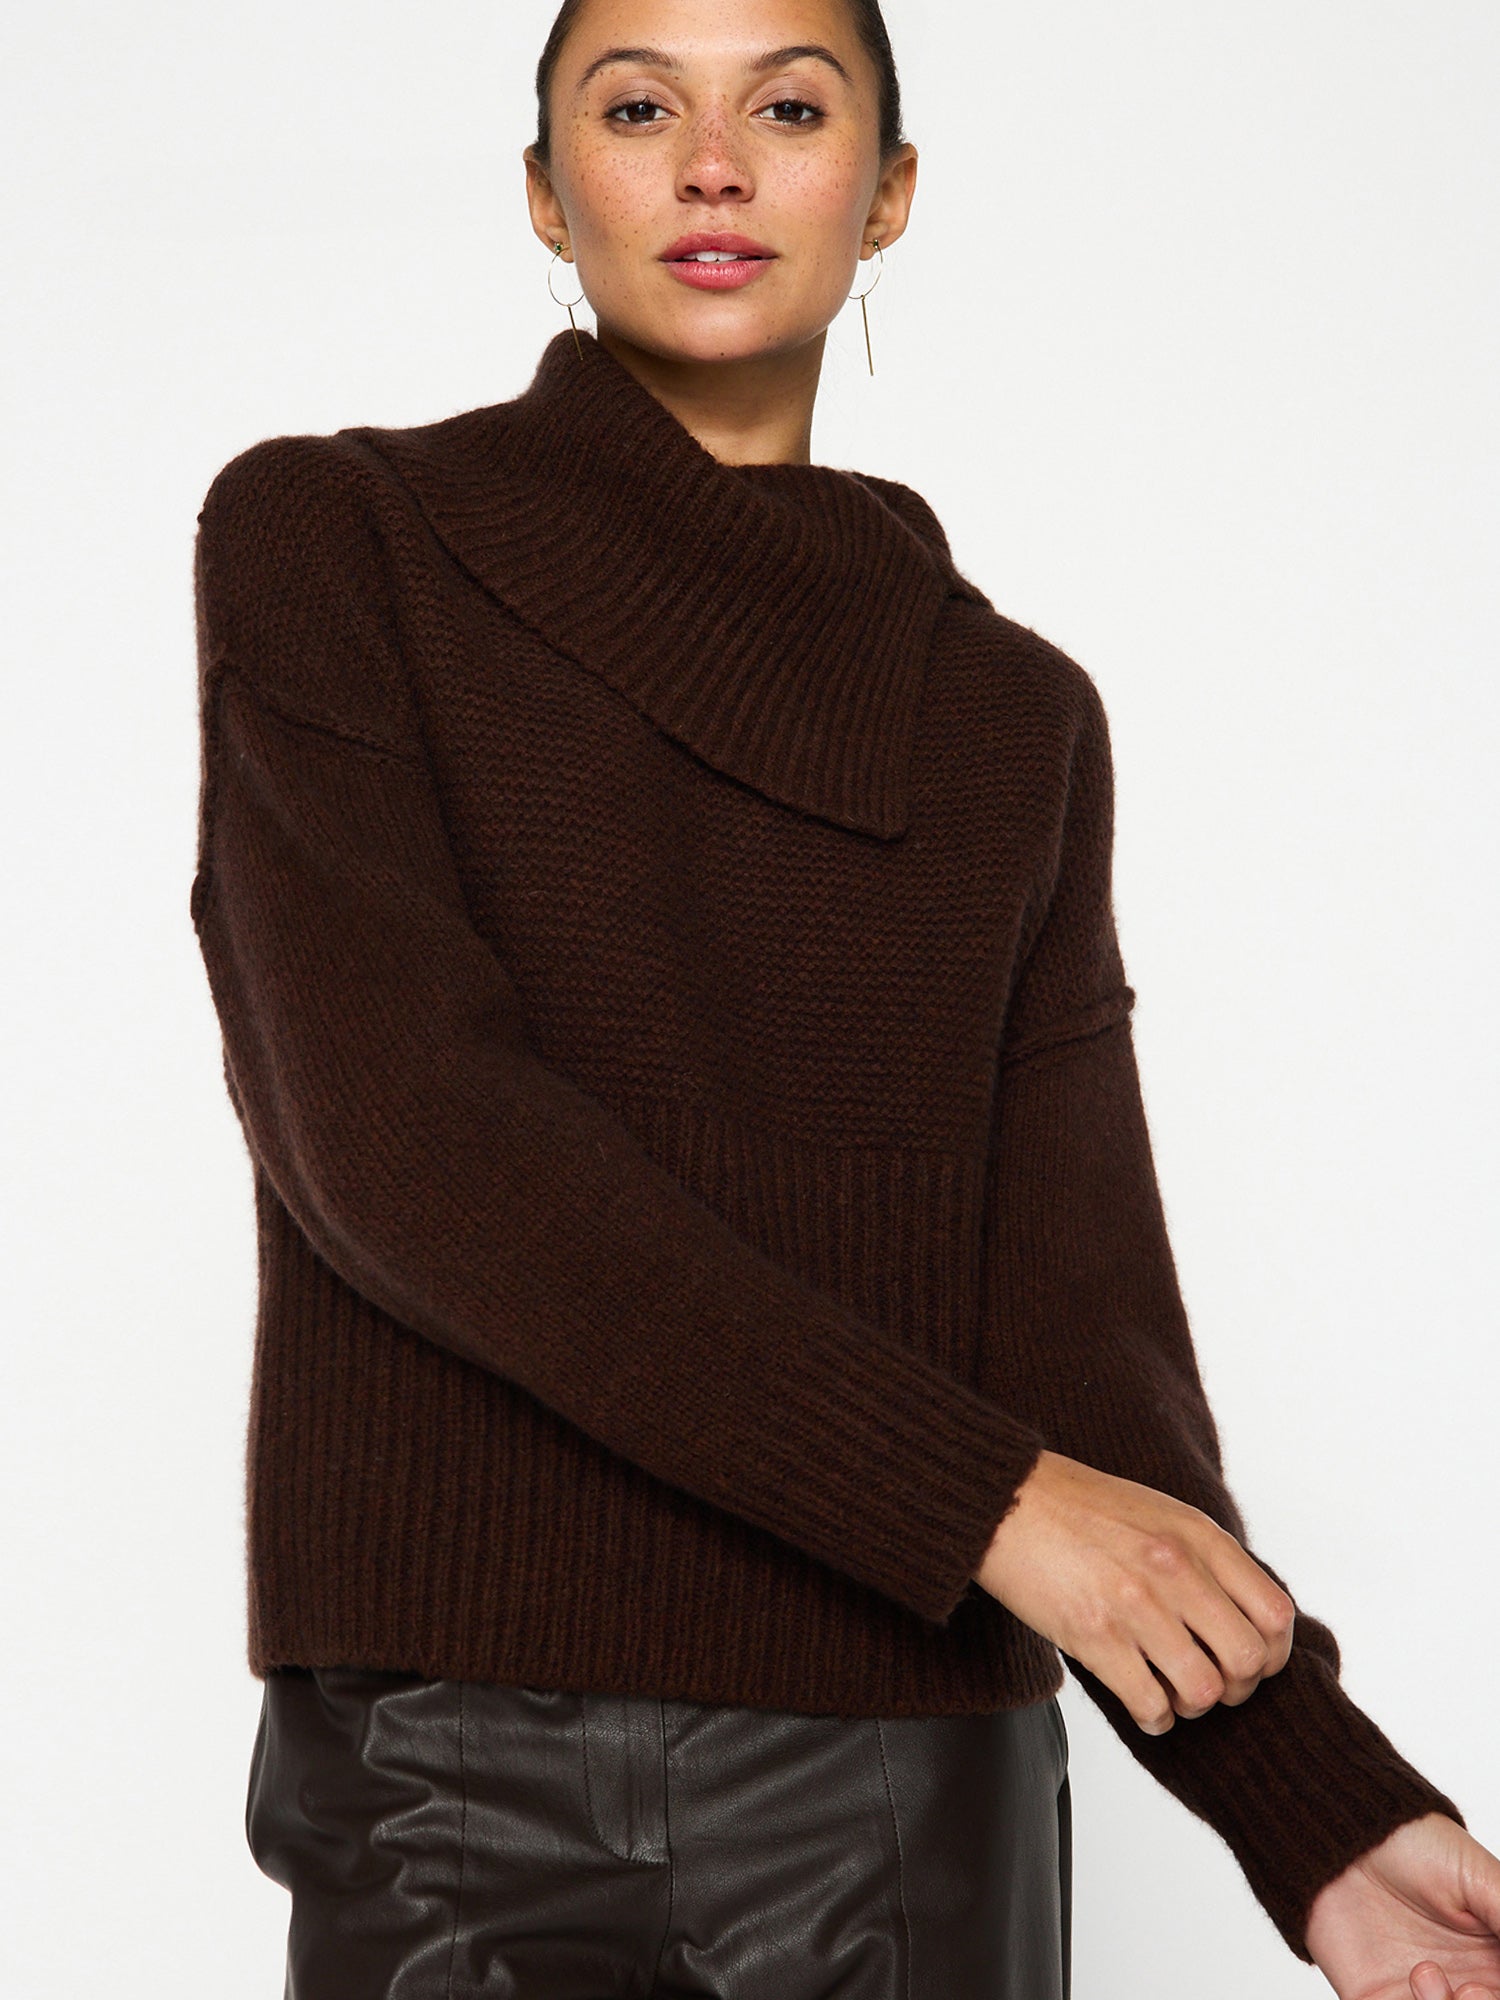 Elian overlap cowlneck wool cashmere brown sweater front view